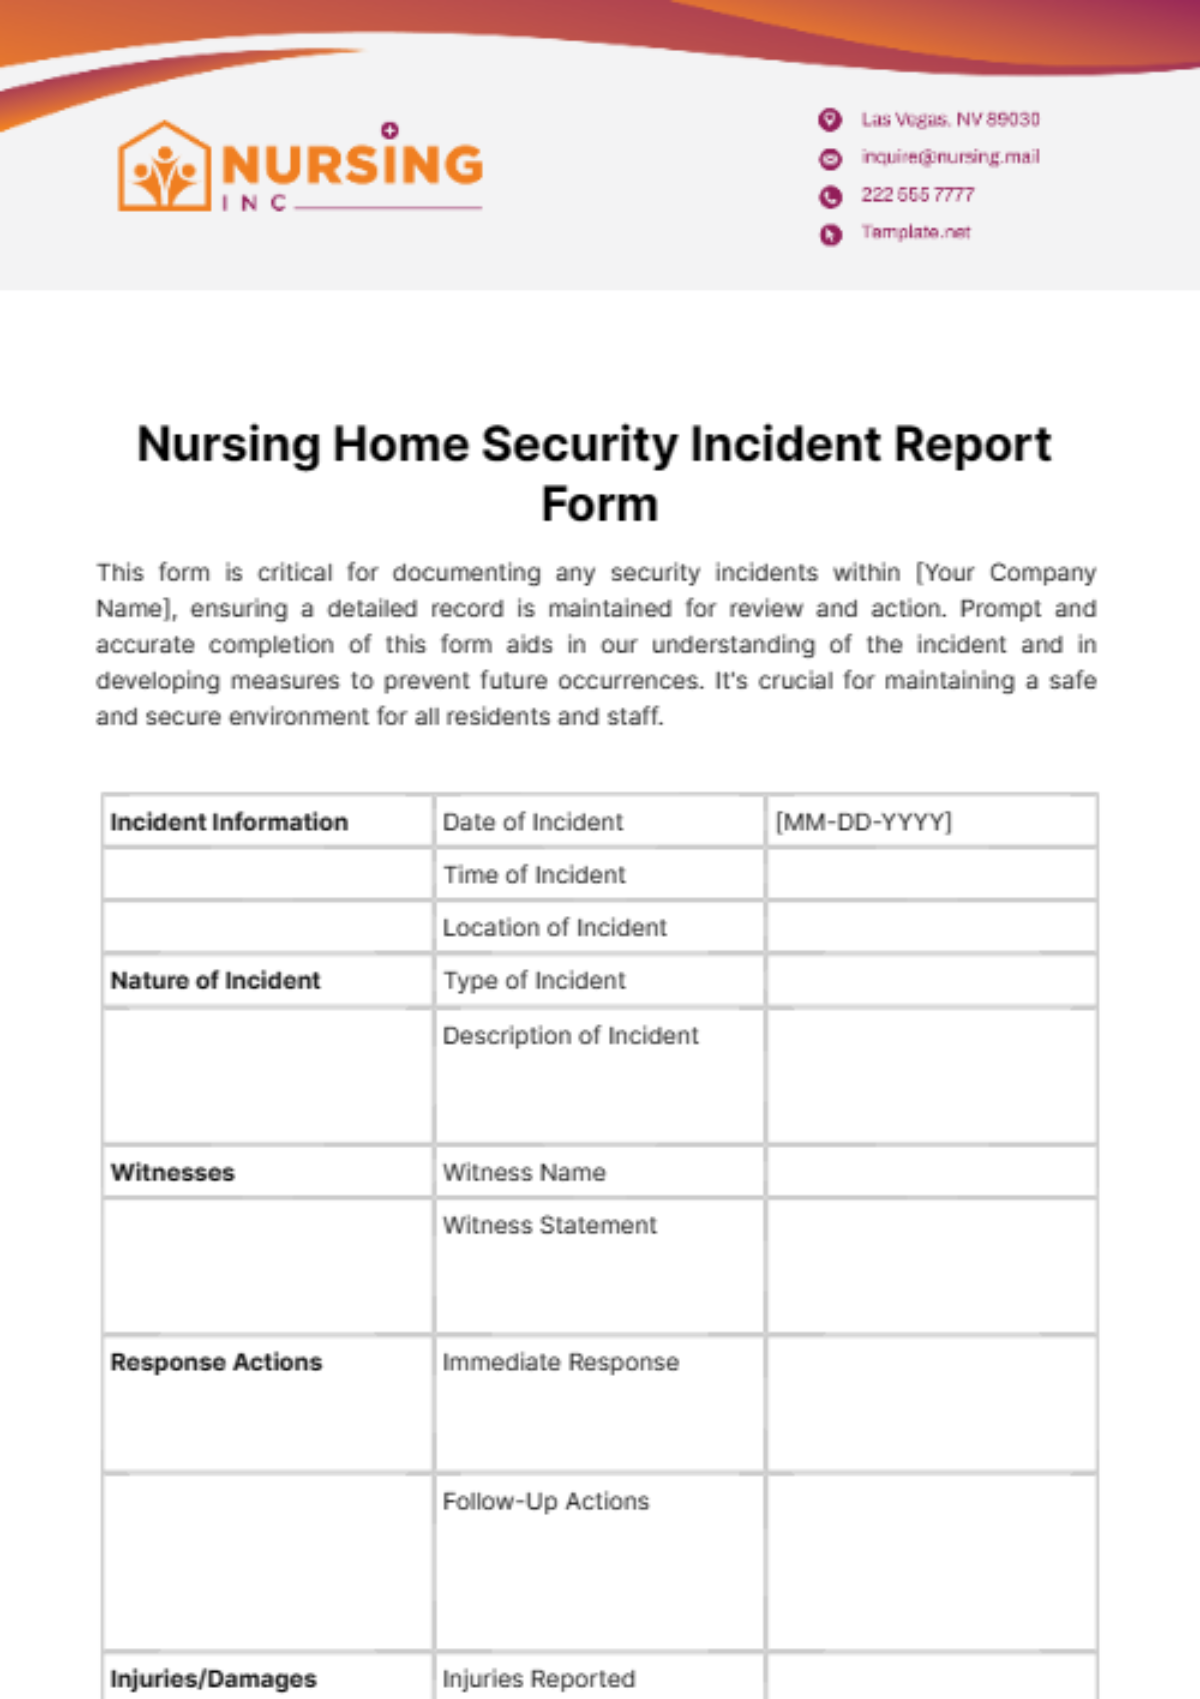 Nursing Home Security Incident Report Form Template